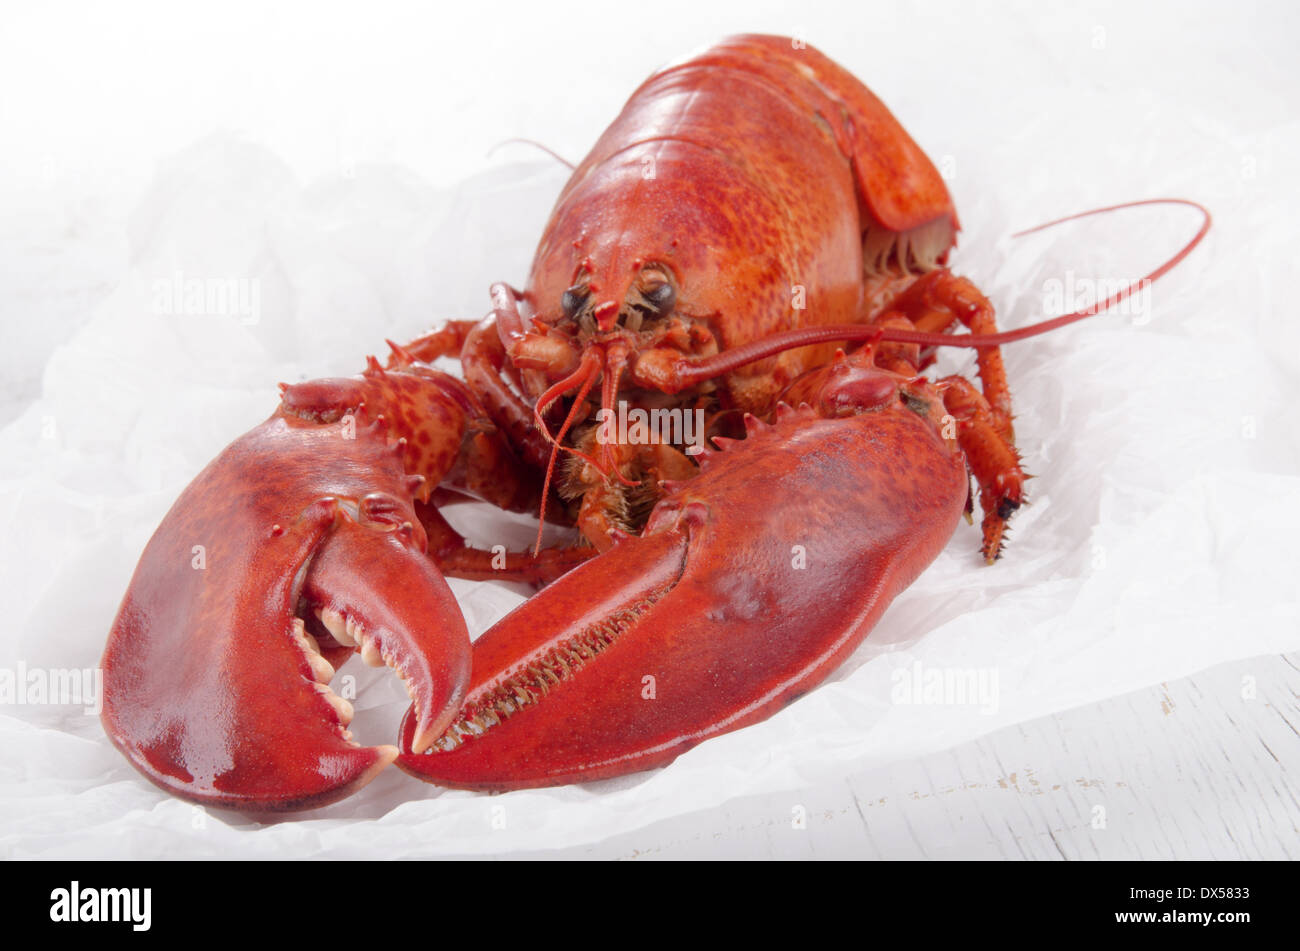 freshly boiled canadian lobster on a white kitchen paper Stock Photo